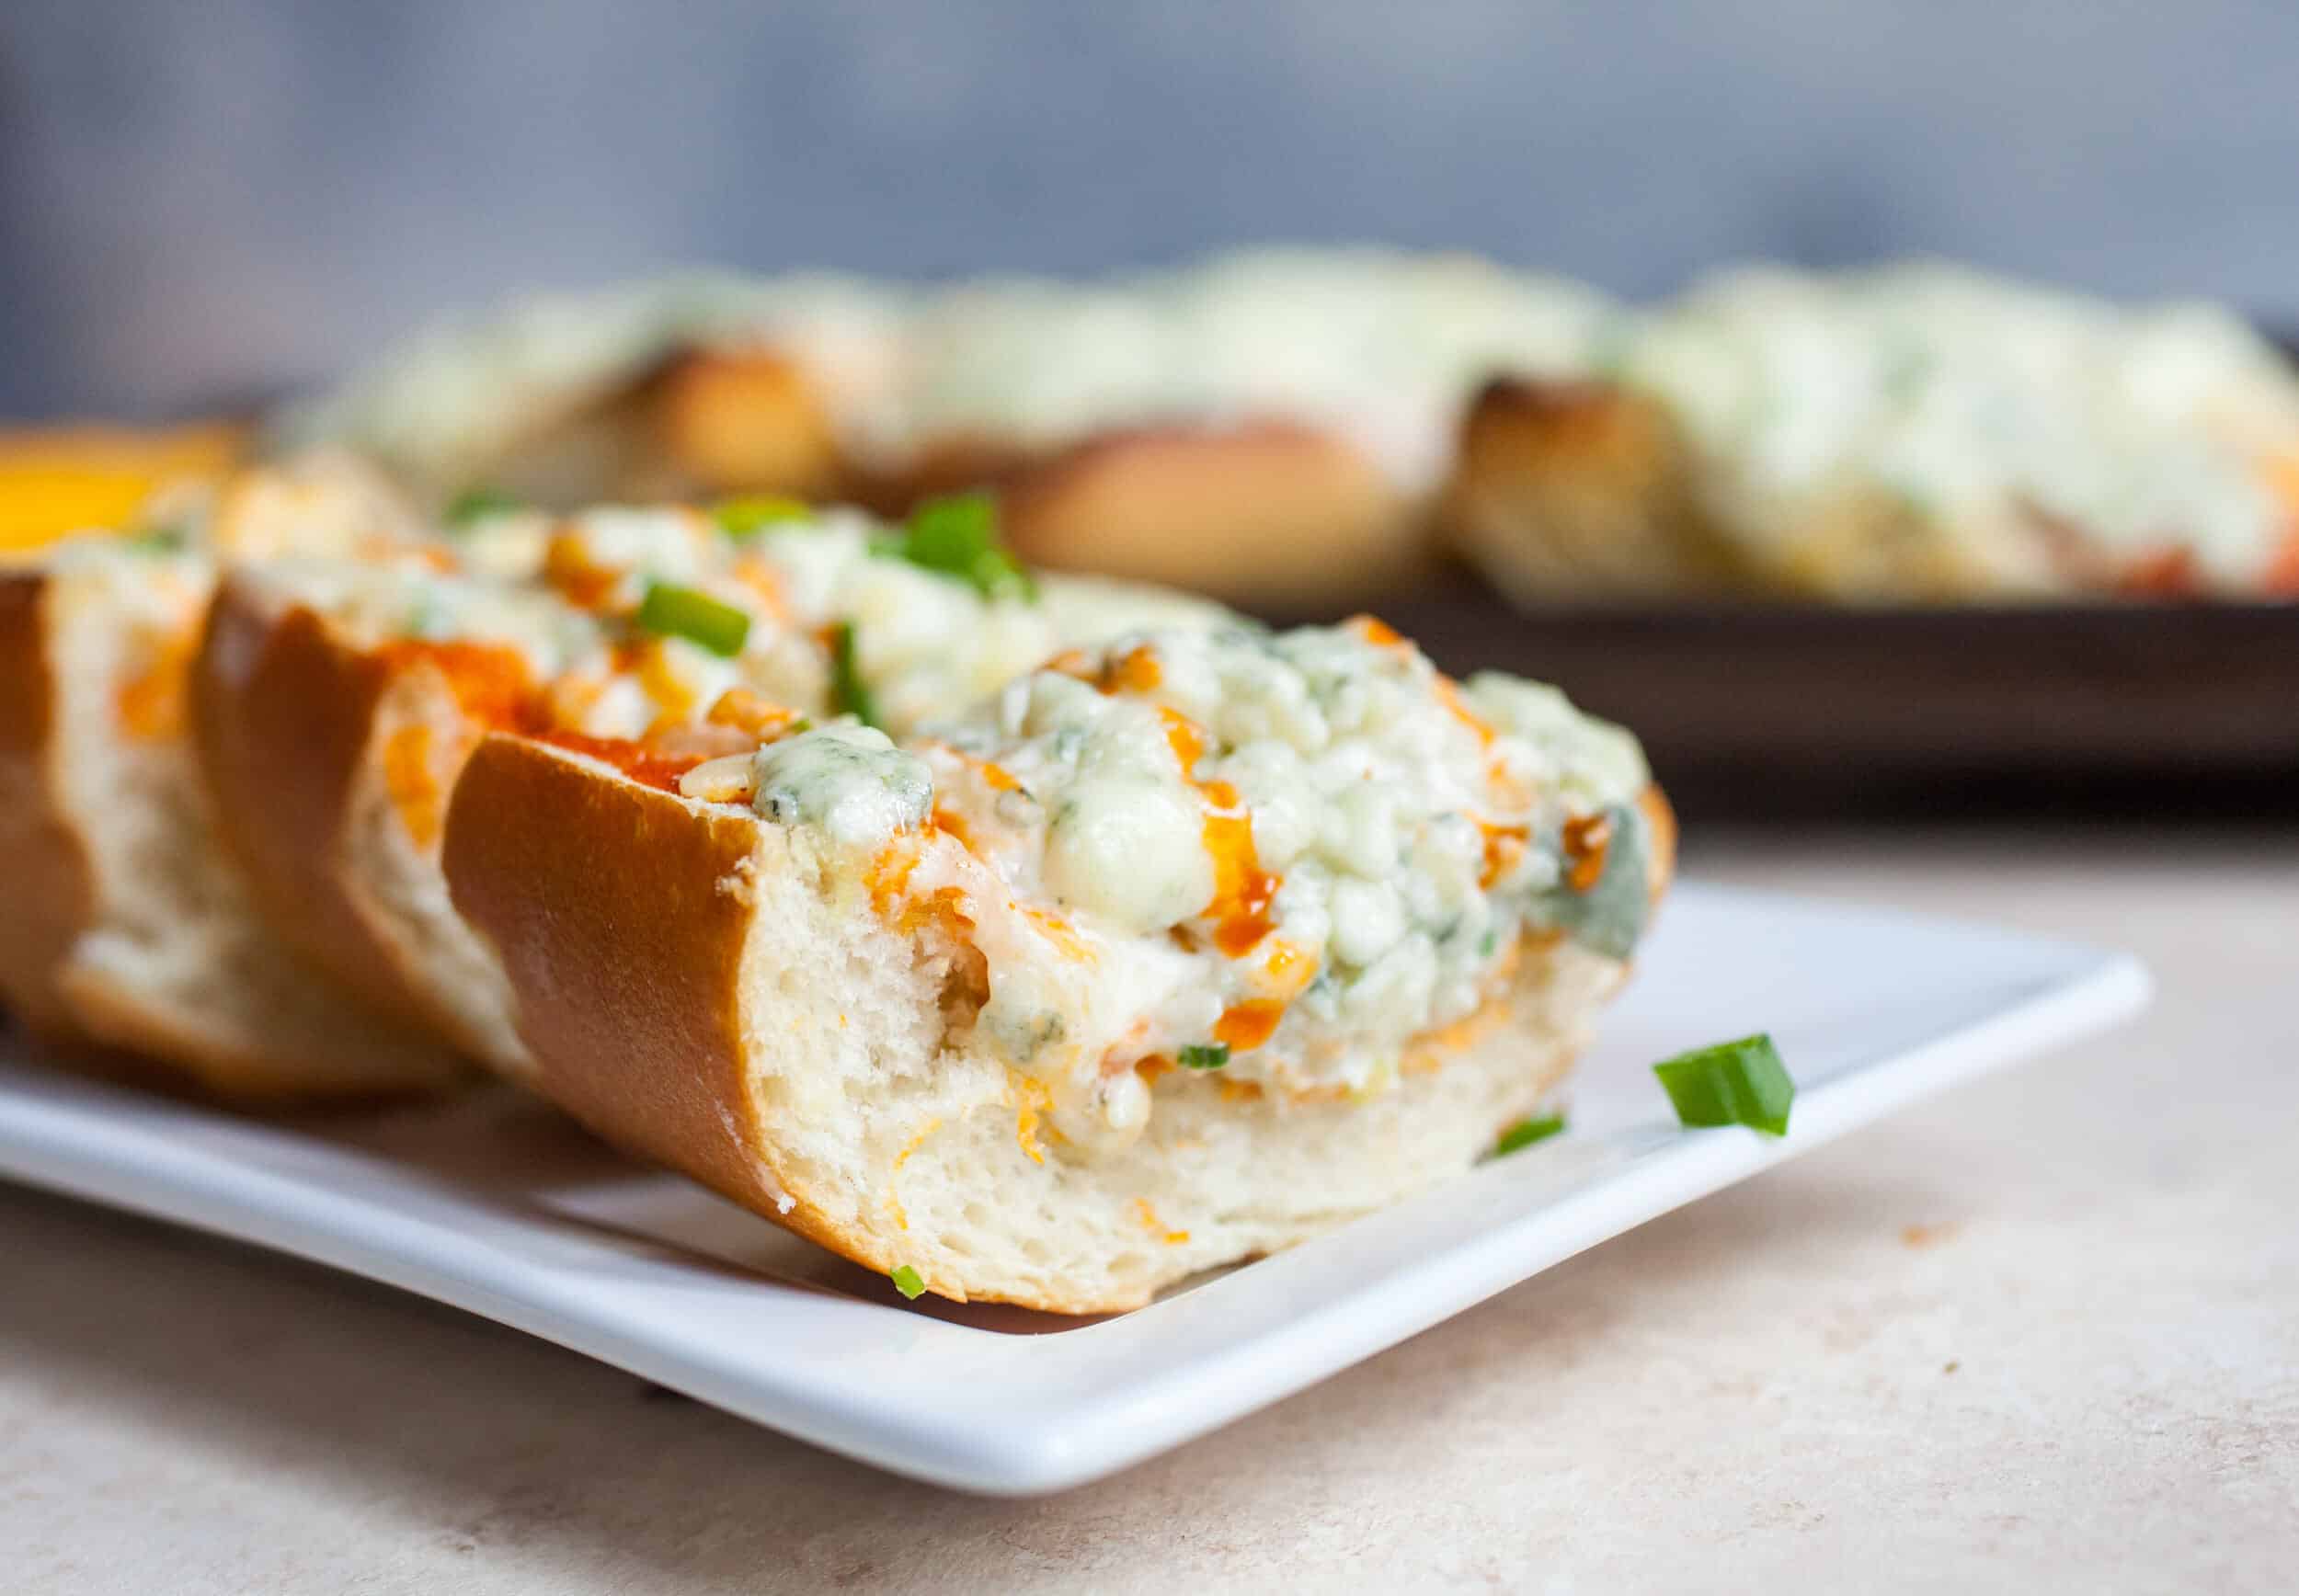 Buffalo Bread: This easy baked bread is a perfect hearty appetizer for game day. Dig in! | macheesmo.com